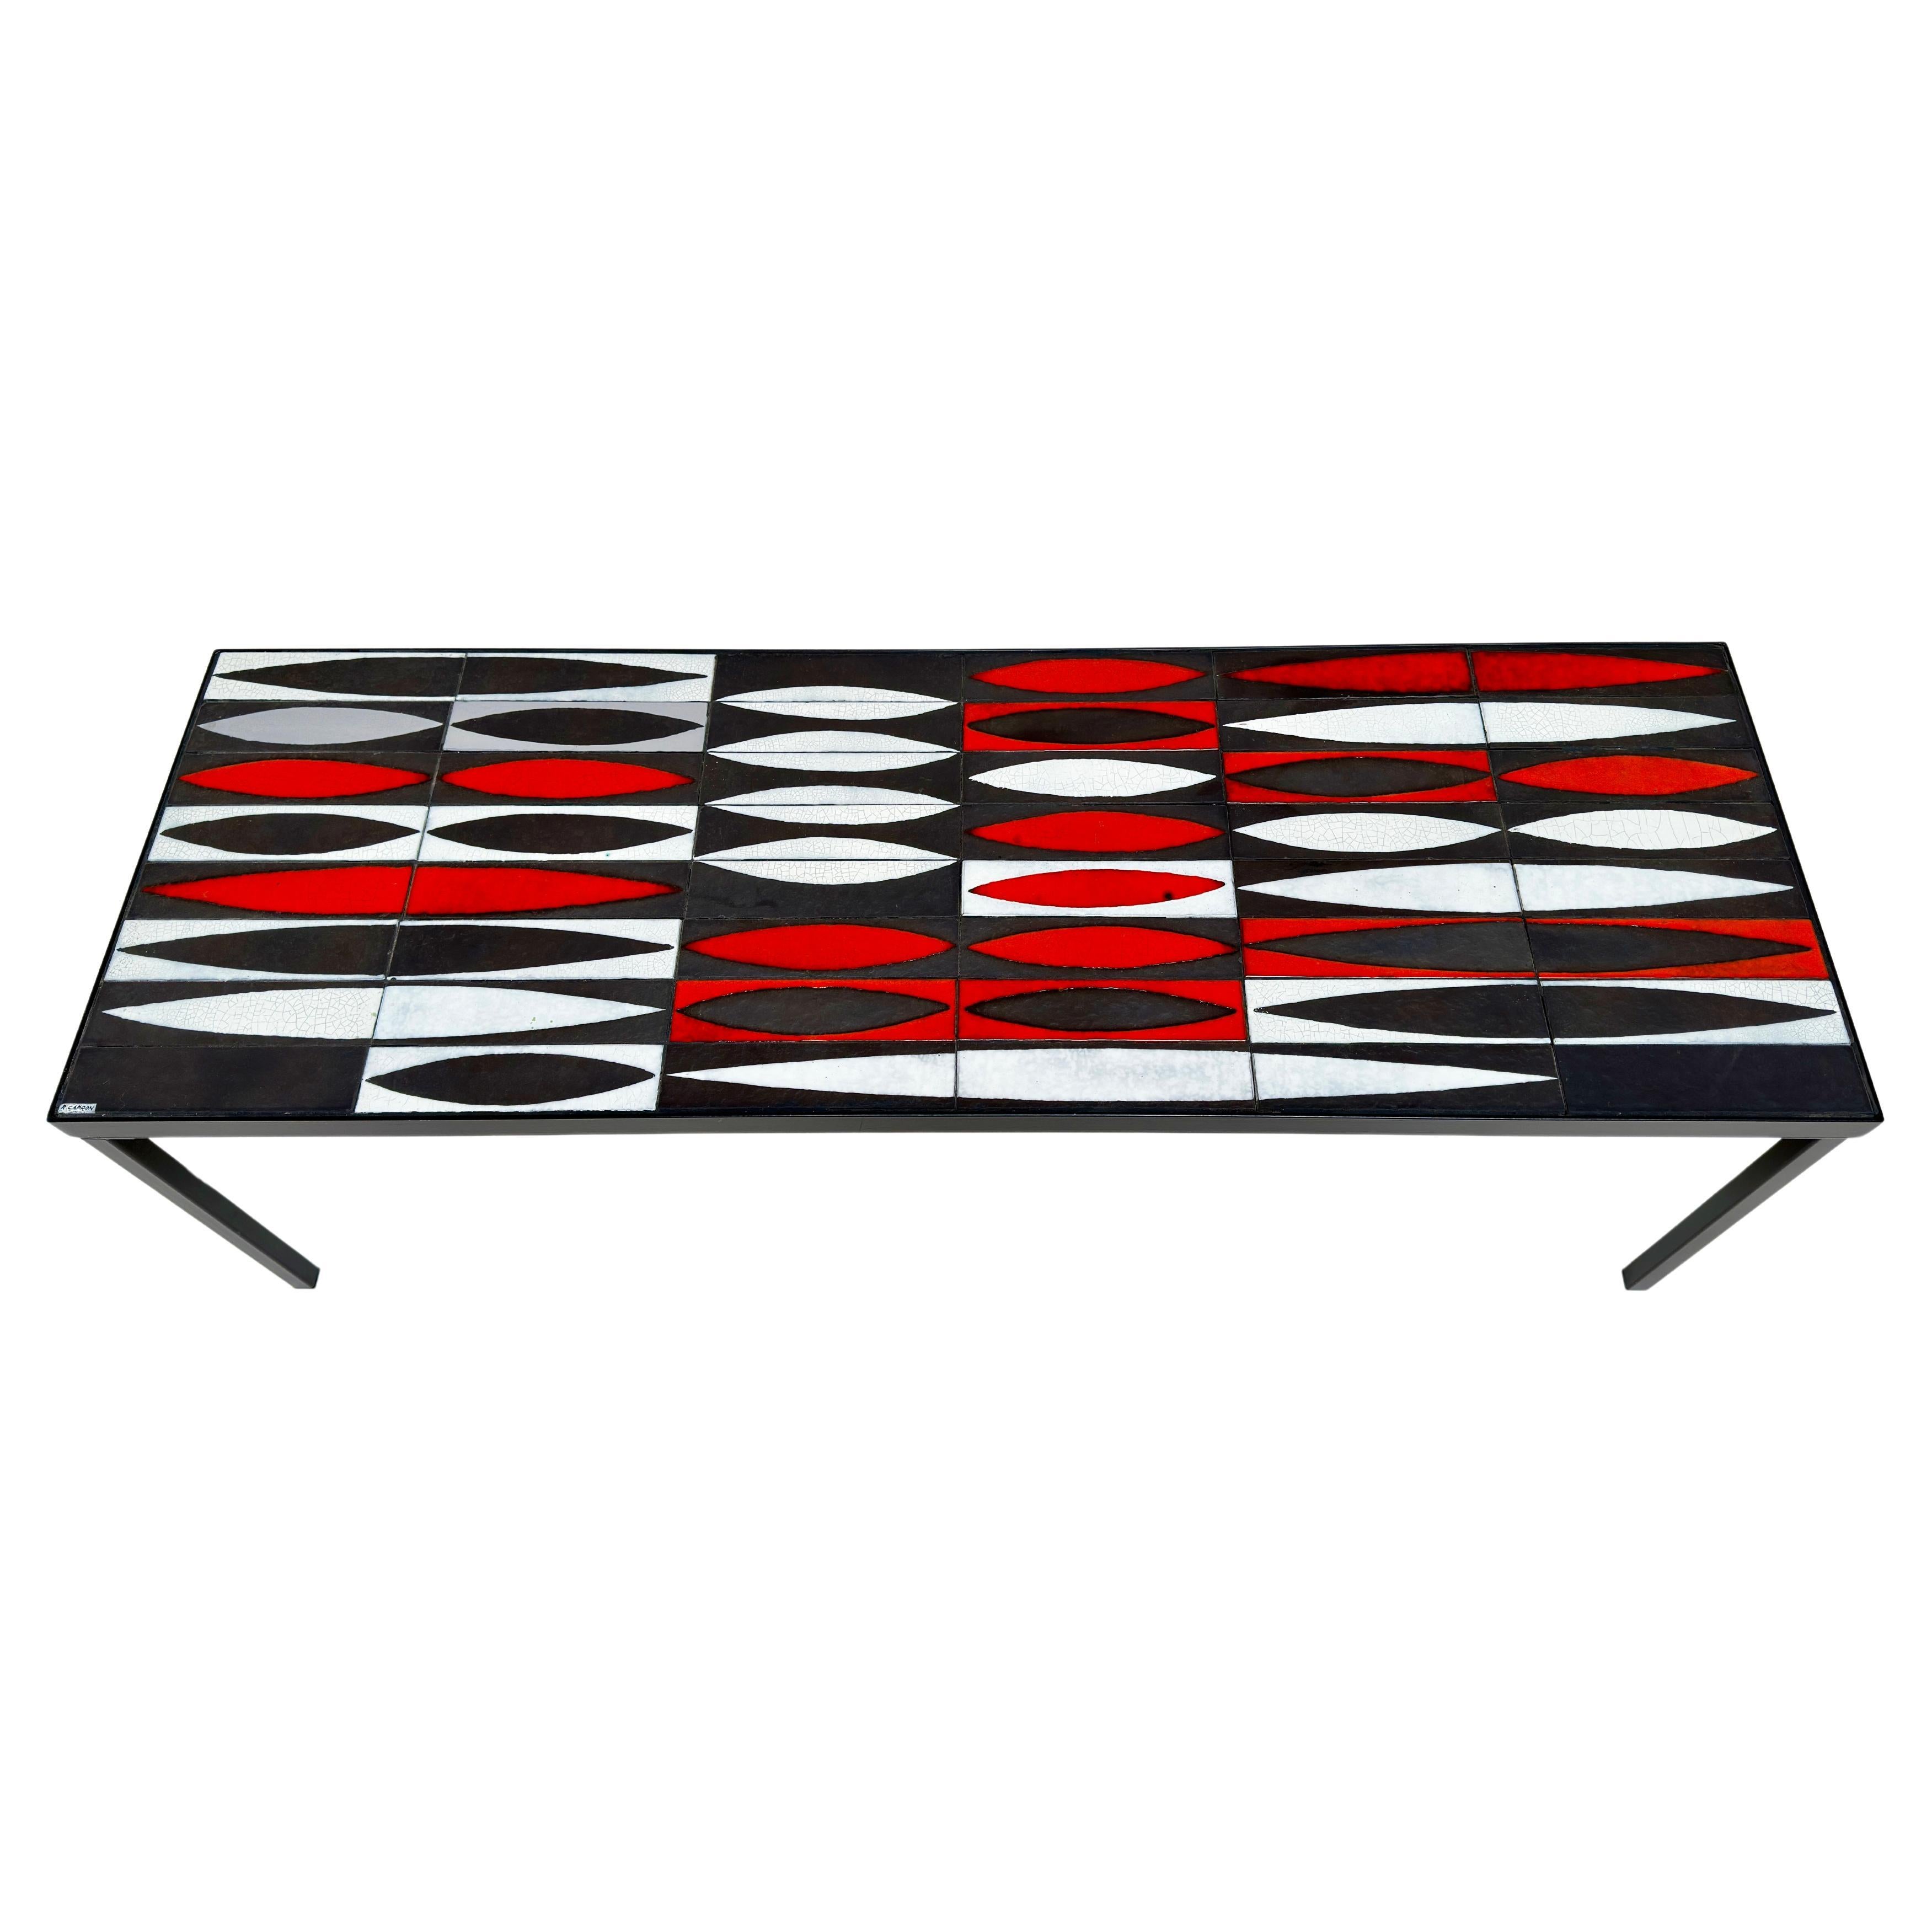 Iconic Navettes Low Table, Roger Capron, Vallauris c. 1960 For Sale